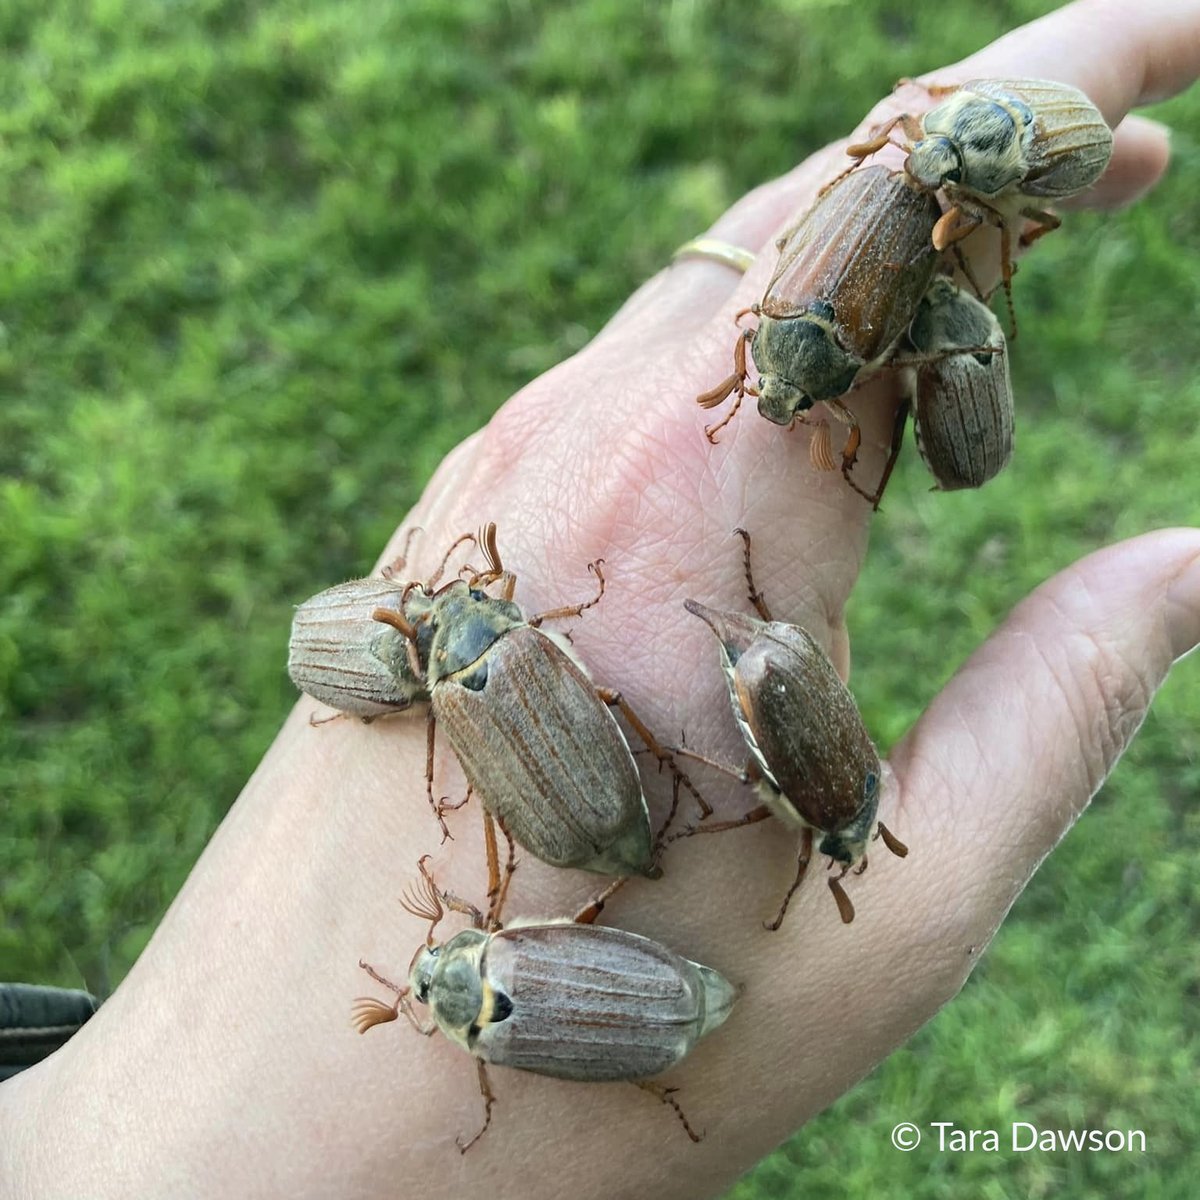 Maybug season is here. Find out more about these gentle giants on our blog: sussexwildlifetrust.org.uk/news/cockchafer photo © Tara Dawson